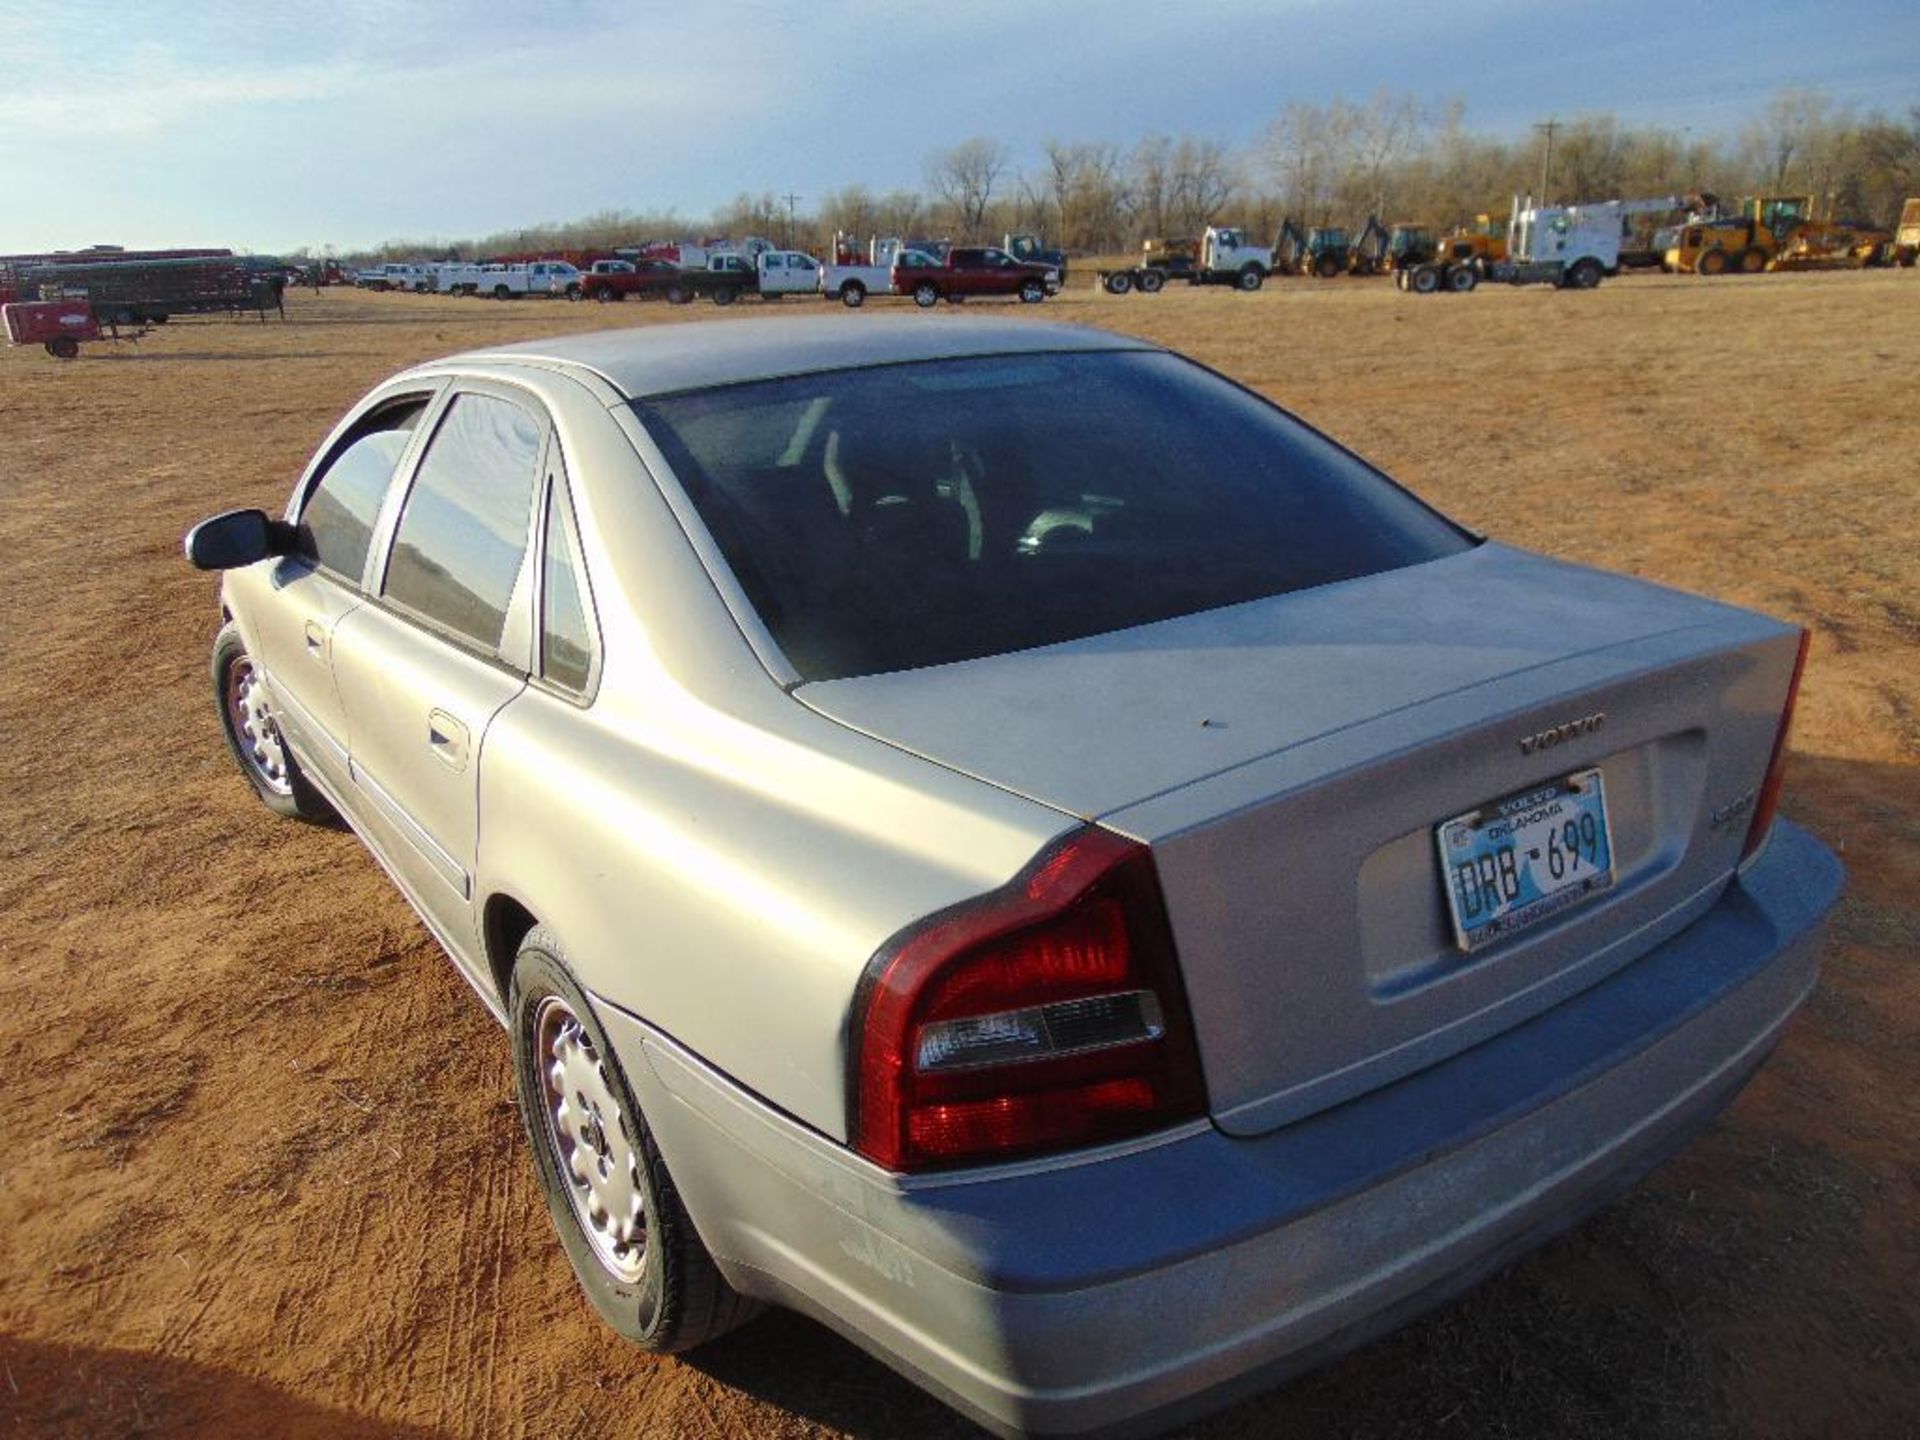 1999 Volvo S80 Car , s/n yv1ts97d3x1053360, I6 eng, auto trans, od reads 148914 miles, - Image 6 of 10